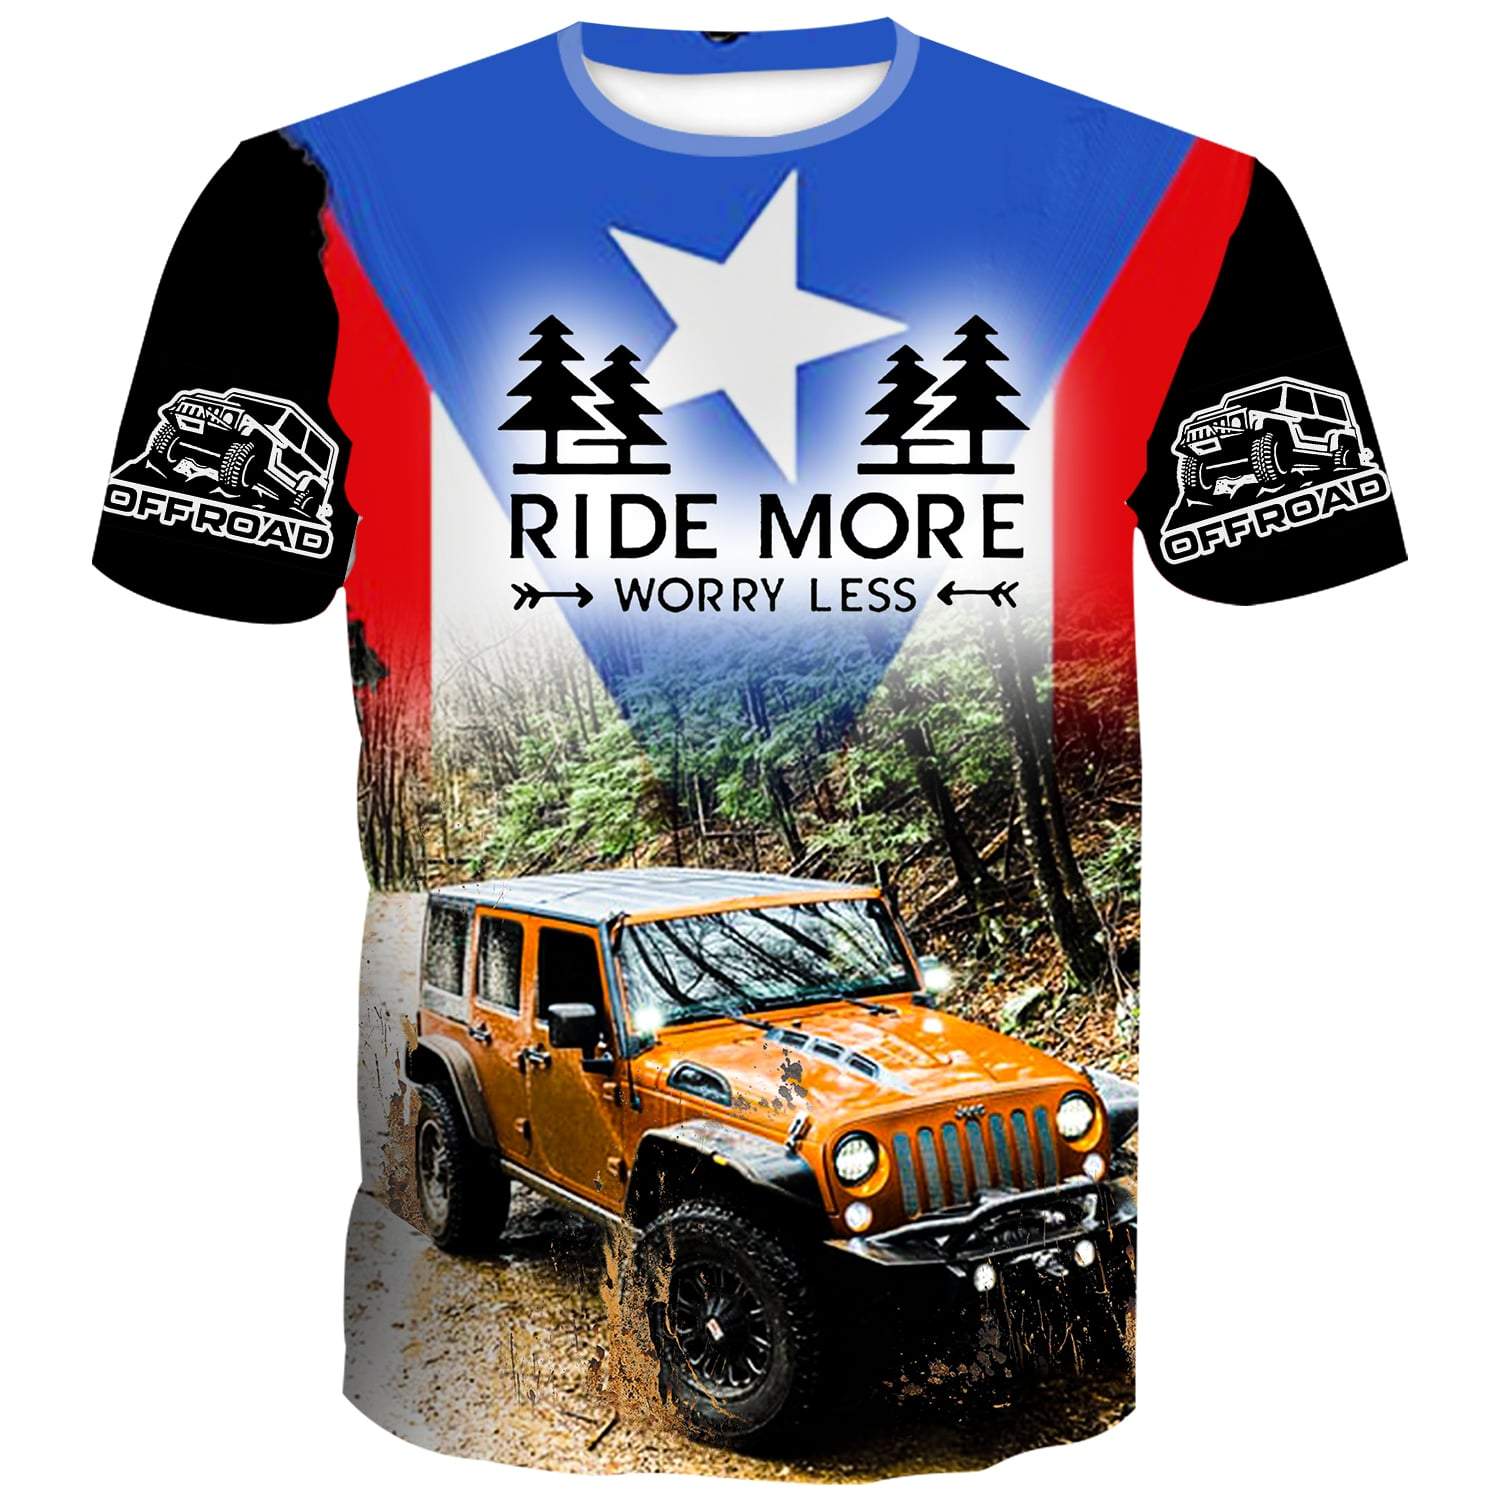 Ride more worry less Puerto Rican Flag - Kid's T-Shirt